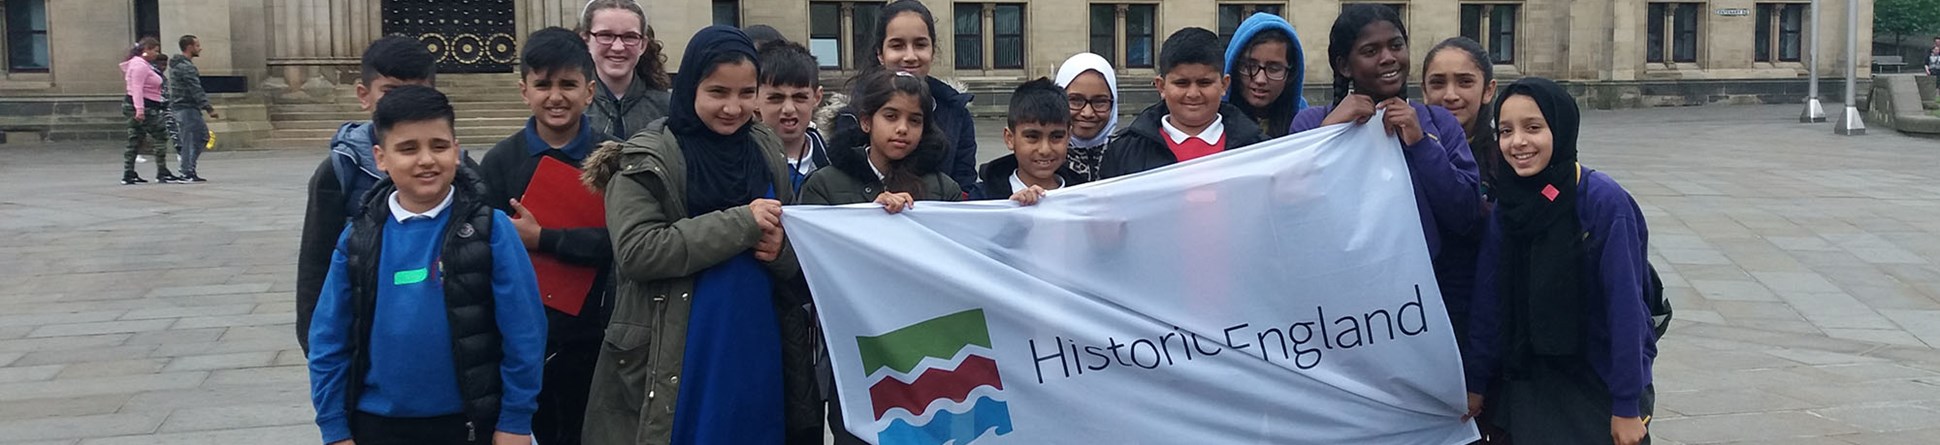 Pupils outside Bradford City Hall holding a banner with the Historic England logo on it.